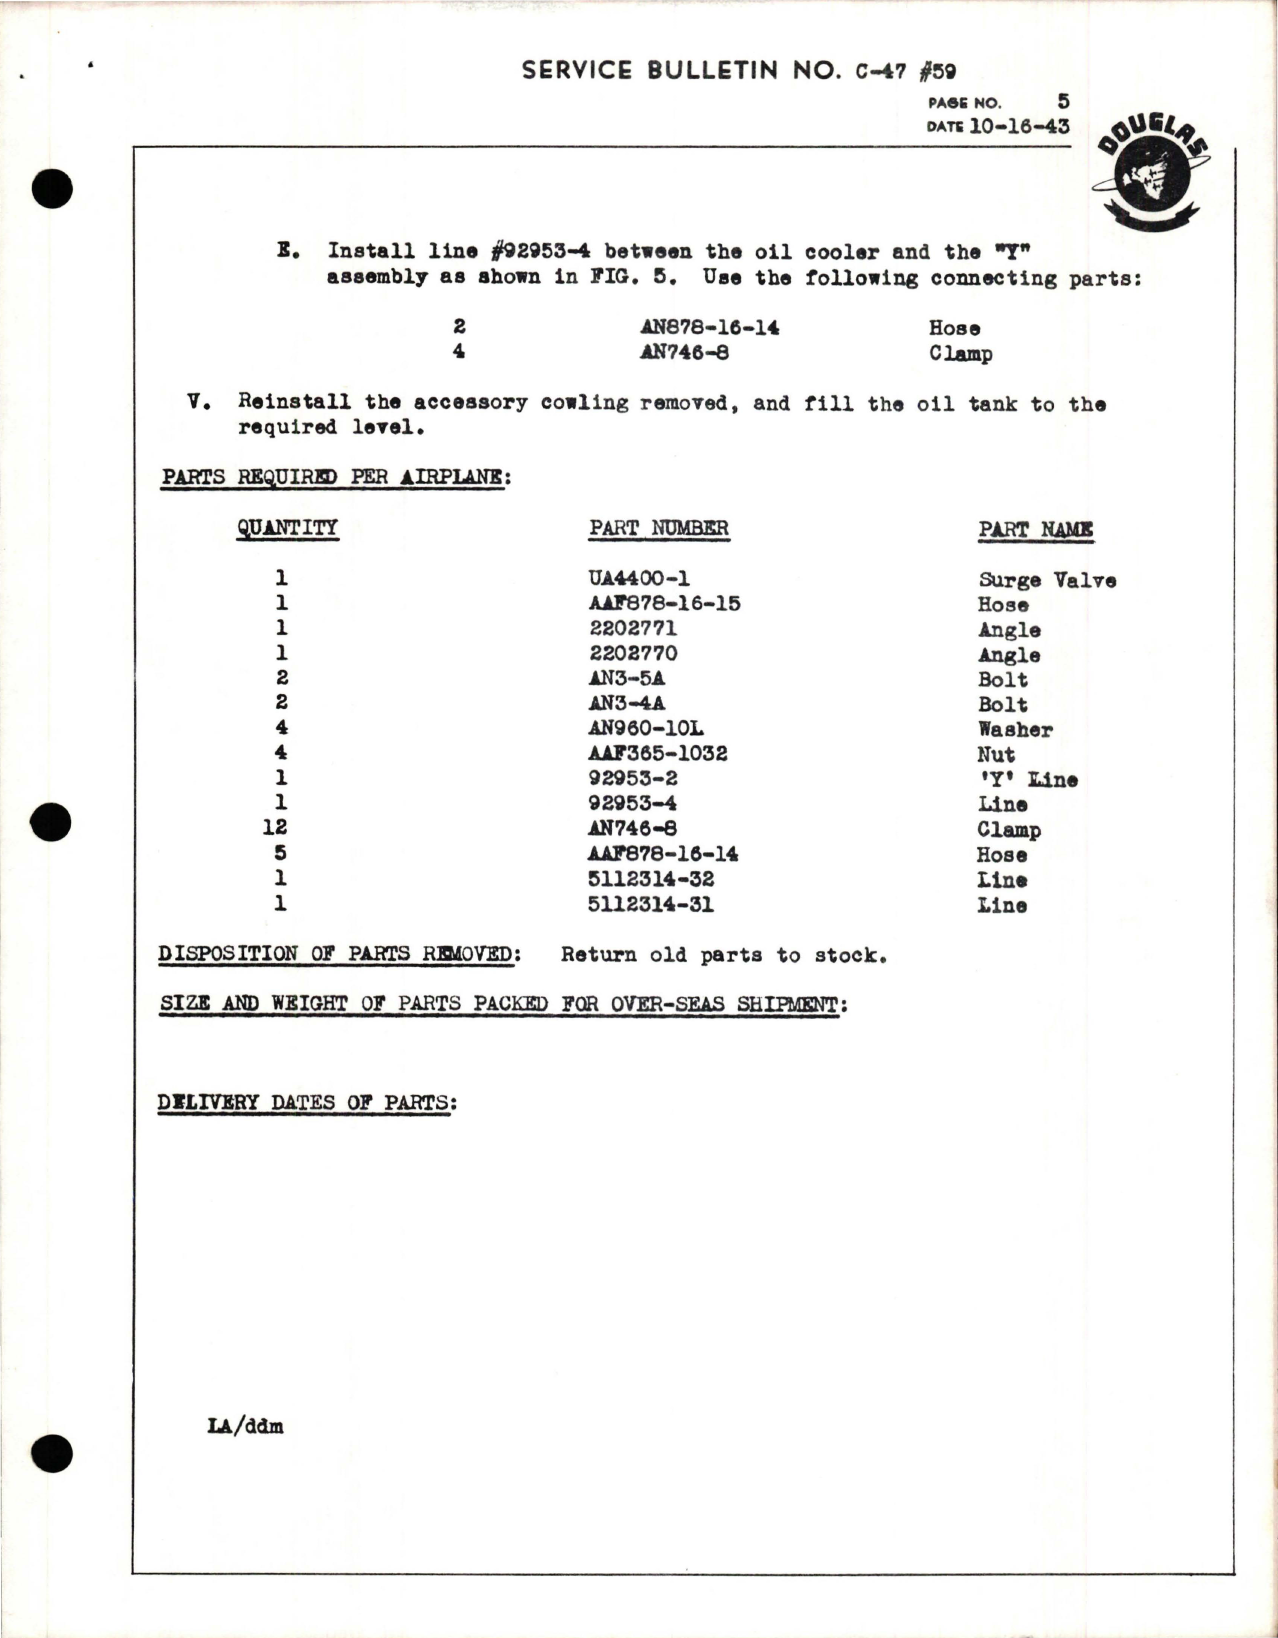 Sample page 5 from AirCorps Library document: Installation of Oil Radiator Surge Valve